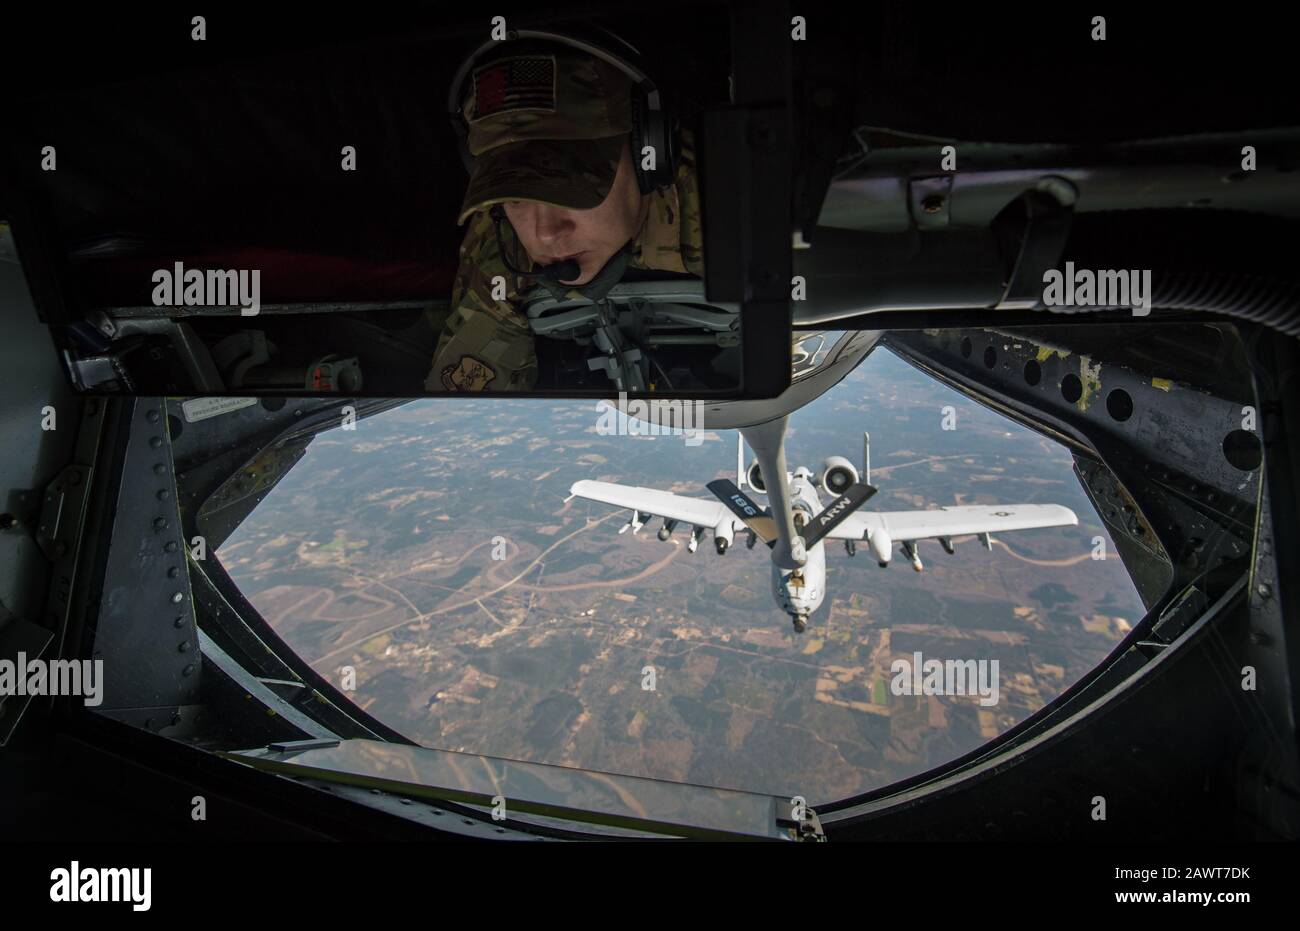 A U.S. Air Force KC-135 Stratotanker boom operator, assigned to the Mississippi Air National Guard 186th Air Refueling Wing, refuels an A-10 Thunderbolt II as part of Southern Strike 2020 over the Gulfport Combat Readiness Training Center, Miss., Feb. 7, 2020. Southern Strike is a large-scale, joint and international combat exercise, which features counter insurgency, close air support, non-combatant evacuation, and maritime special operations. (U.S. Air Force photo by Staff Sgt. Trevor T. McBride) Stock Photo